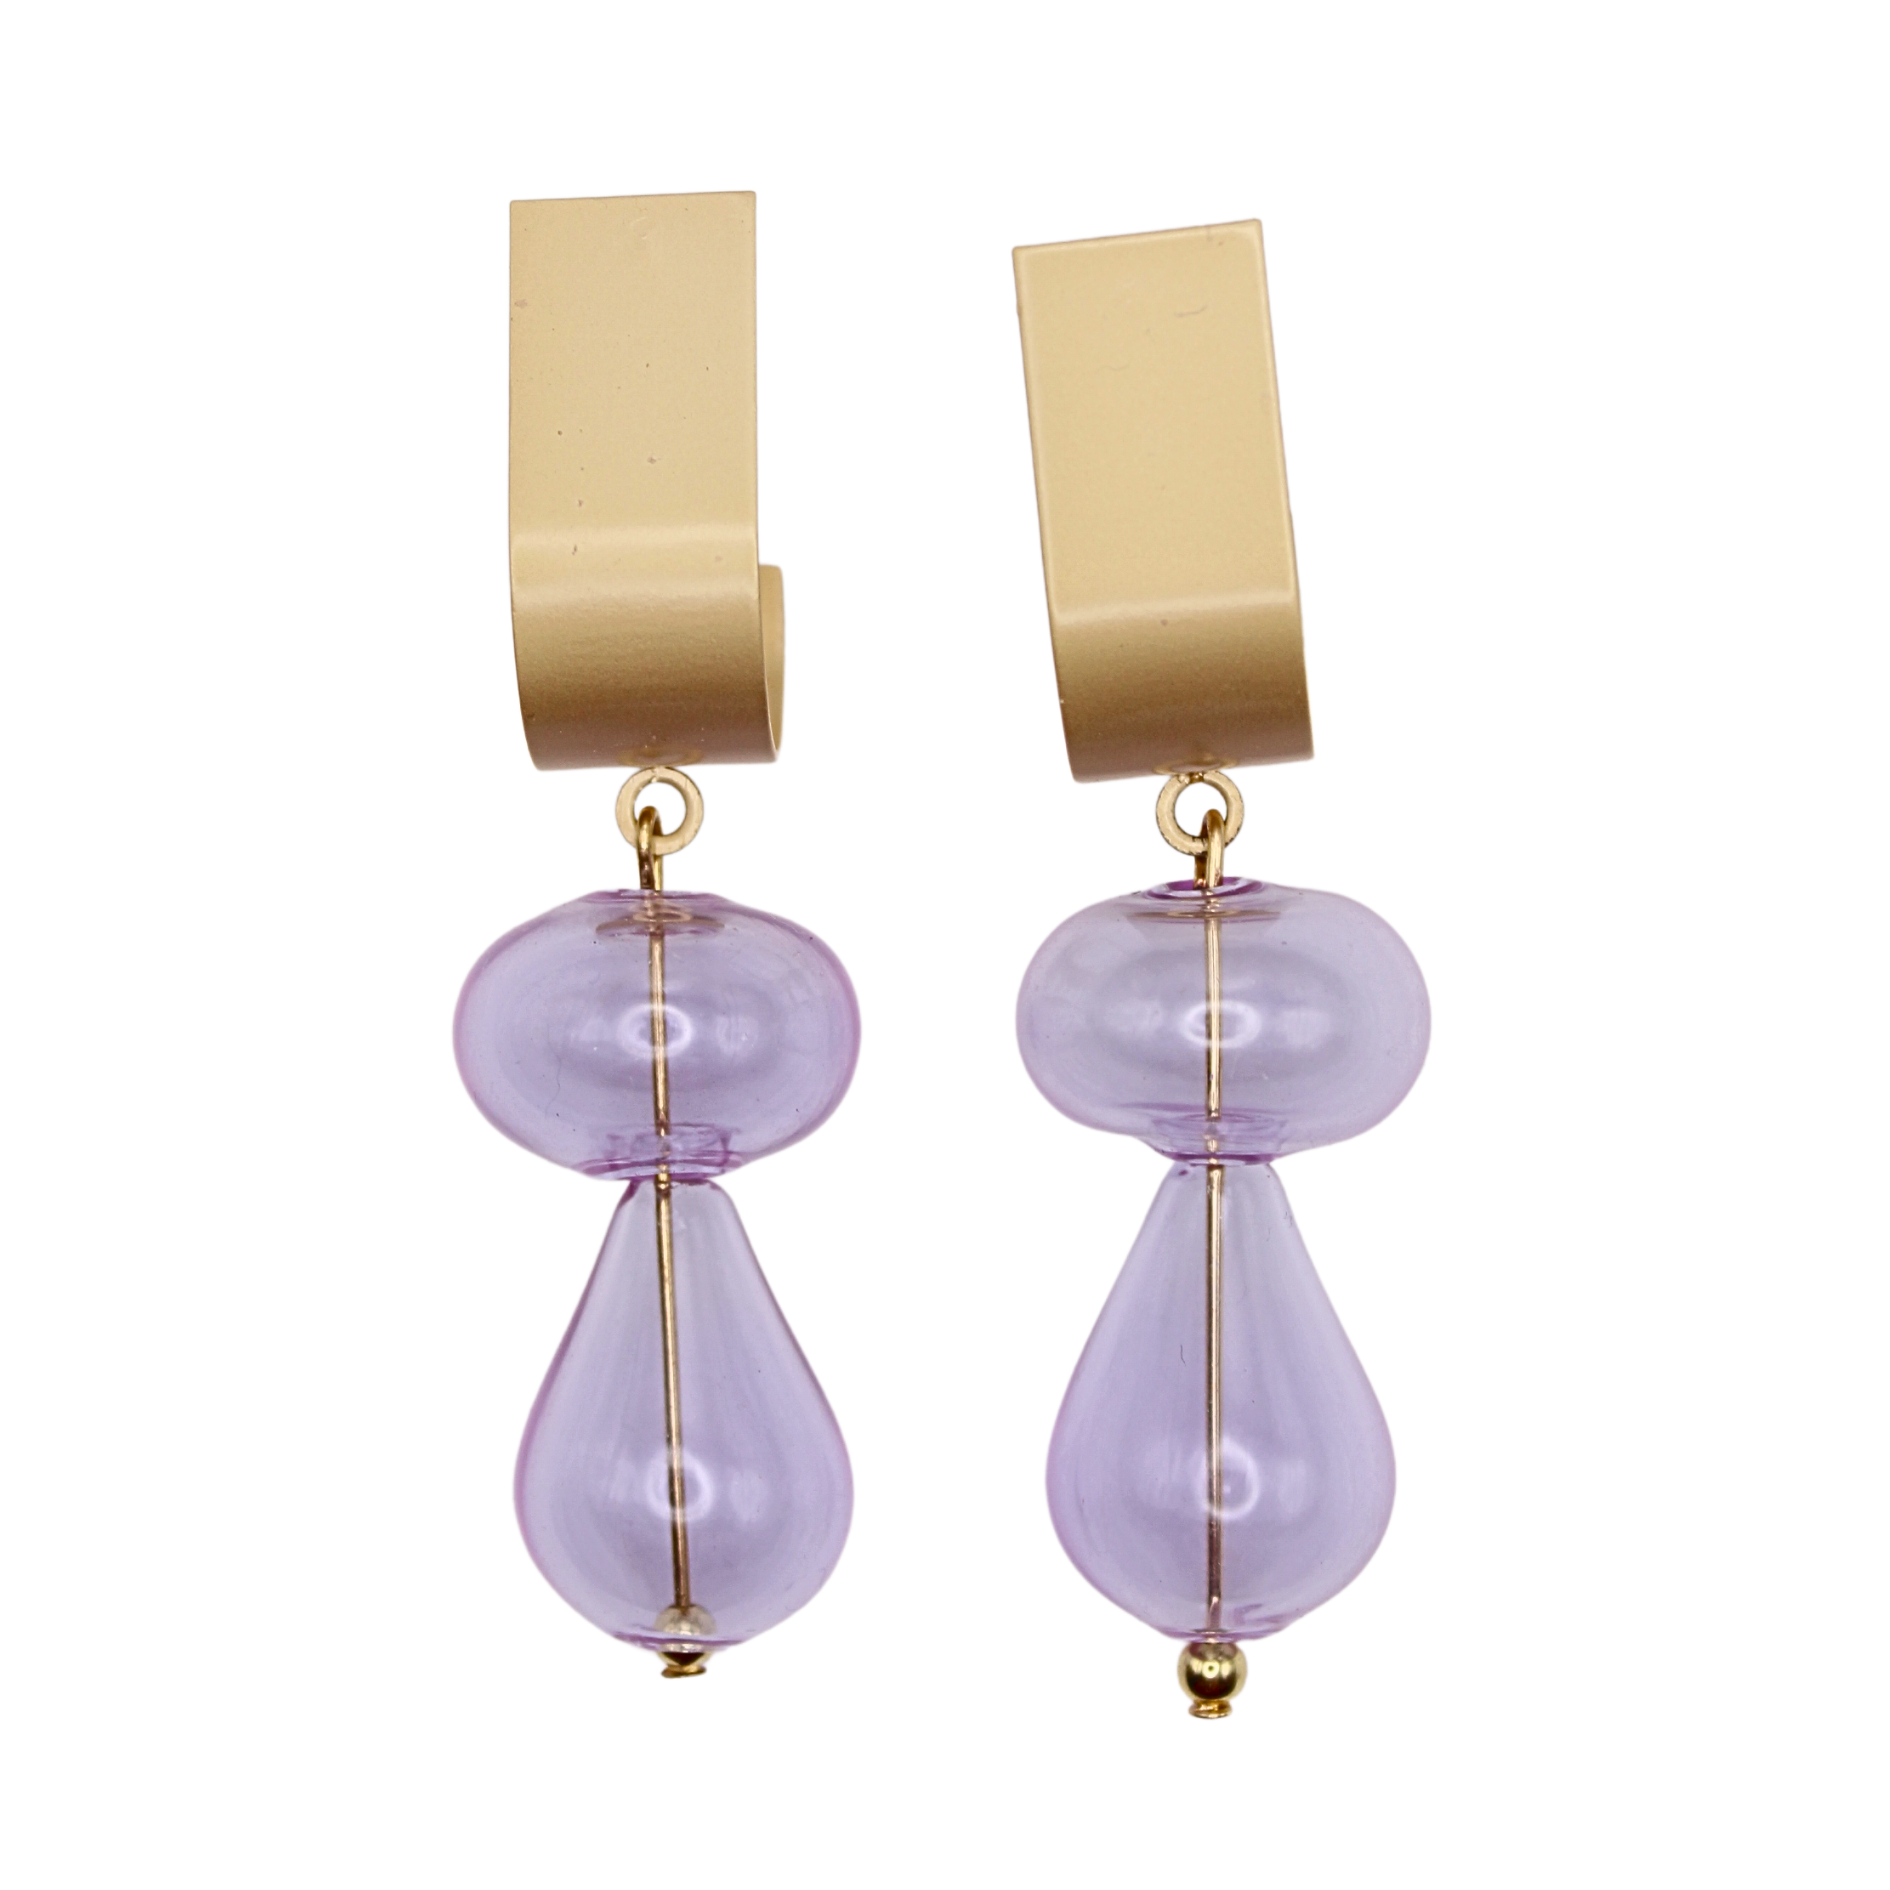 These stunning earrings are an eye catching statement piece. Made with hypoallergenic hardware and handmade glass lamp work beads, they are the perfect balance of delicate and showstopping. 